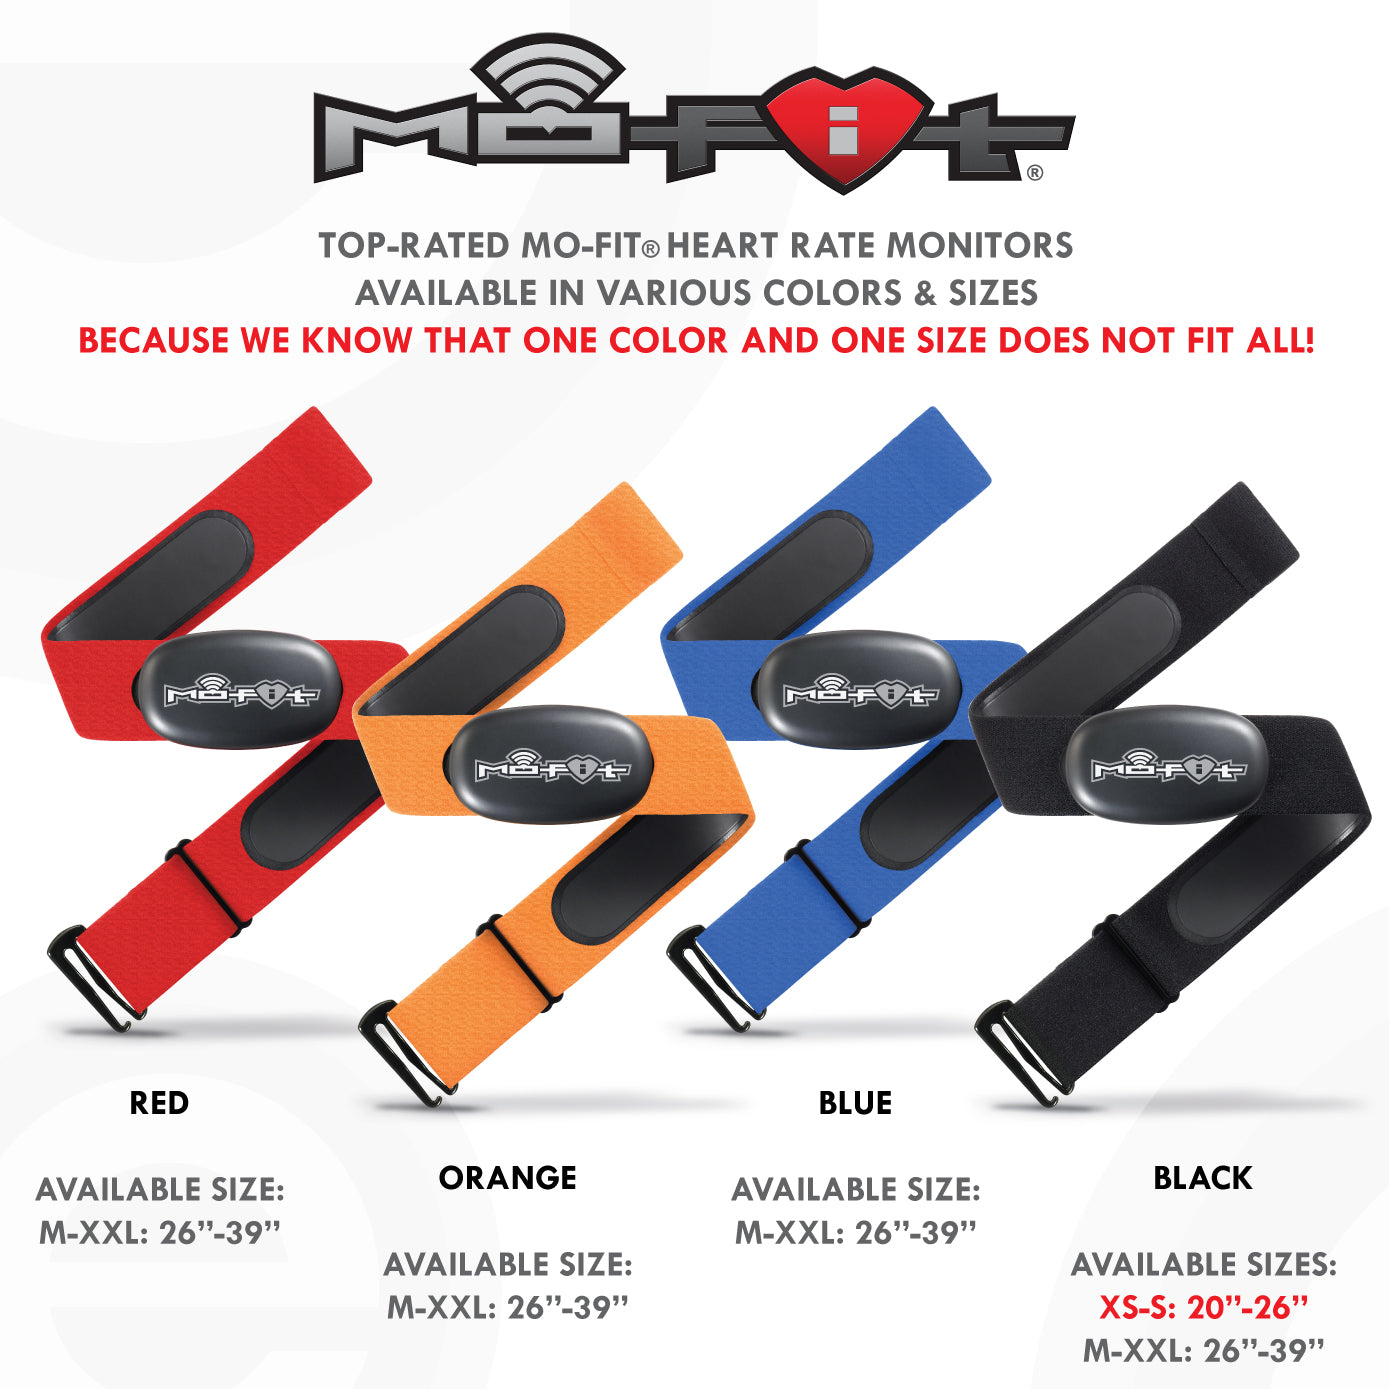 Mo-Fit Heart Rate Monitor Chest Strap for Garmin, Apple, Android, Peloton, Zwift, ANT+ and Most Bluetooth 4.0 Enabled Fitness Devices - image 5 of 6